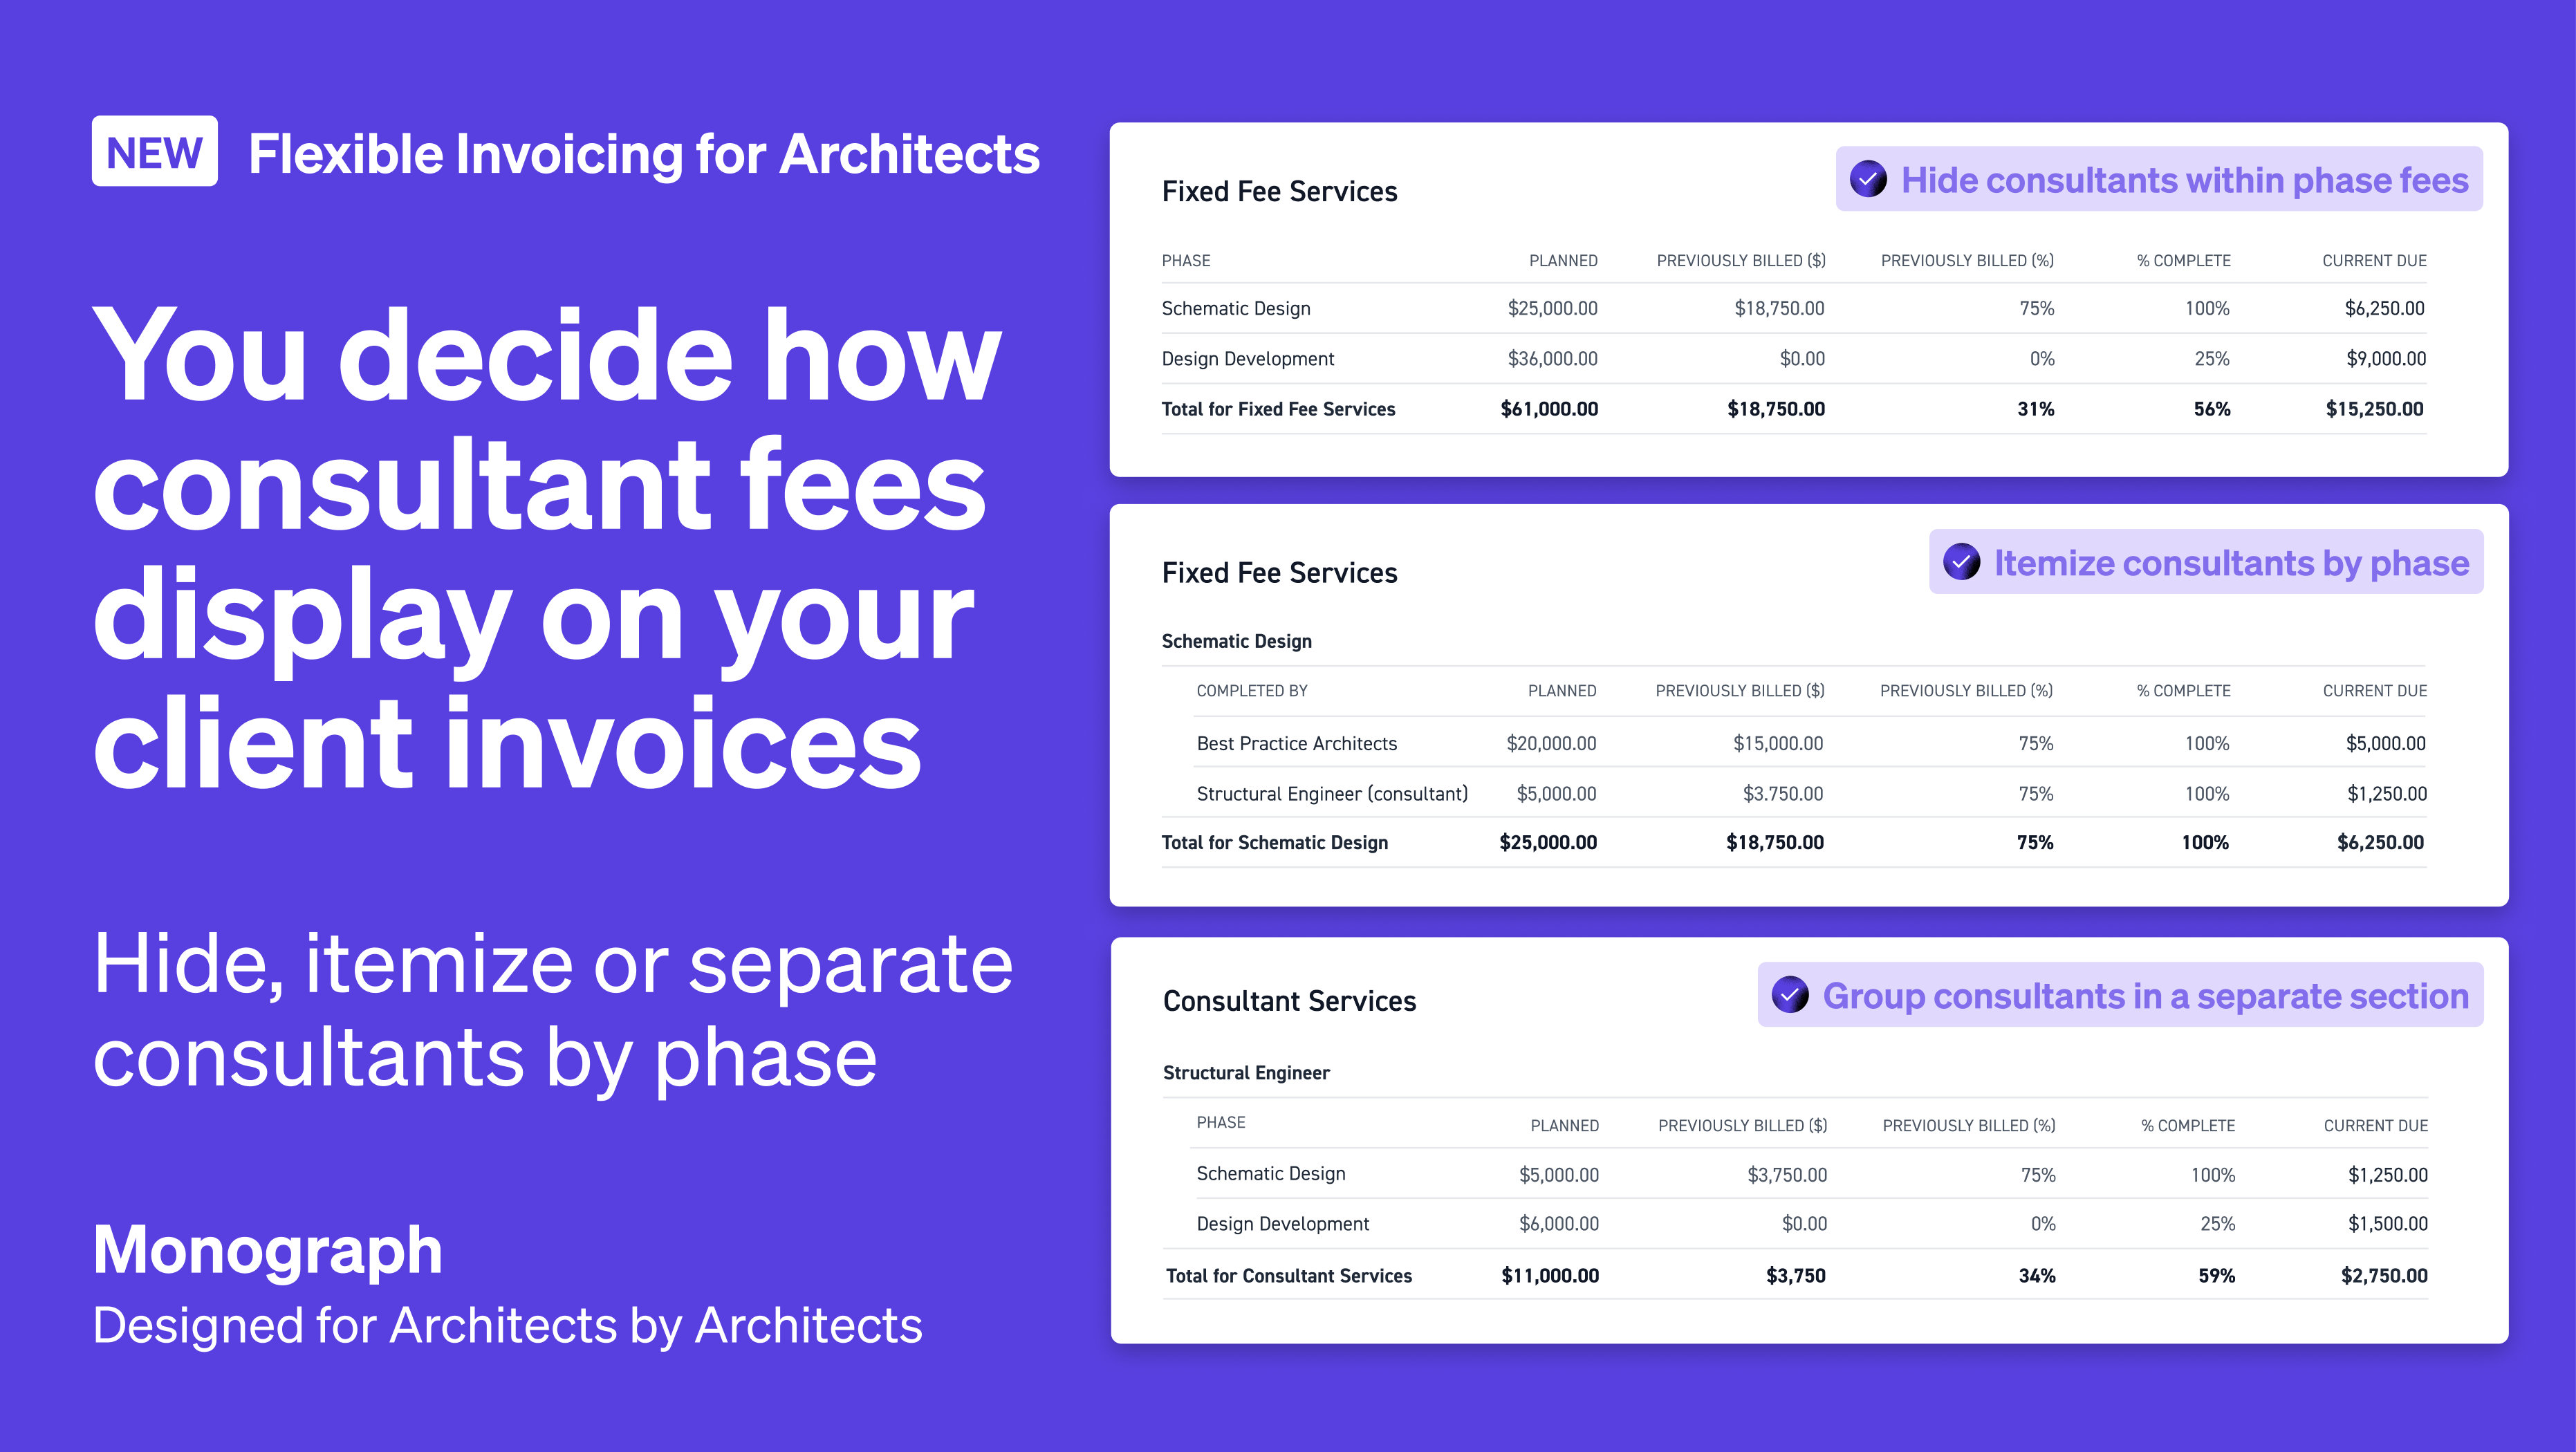 Monograph-Promo-Invoice-Consultants-By-Phase-Architecture-Fees